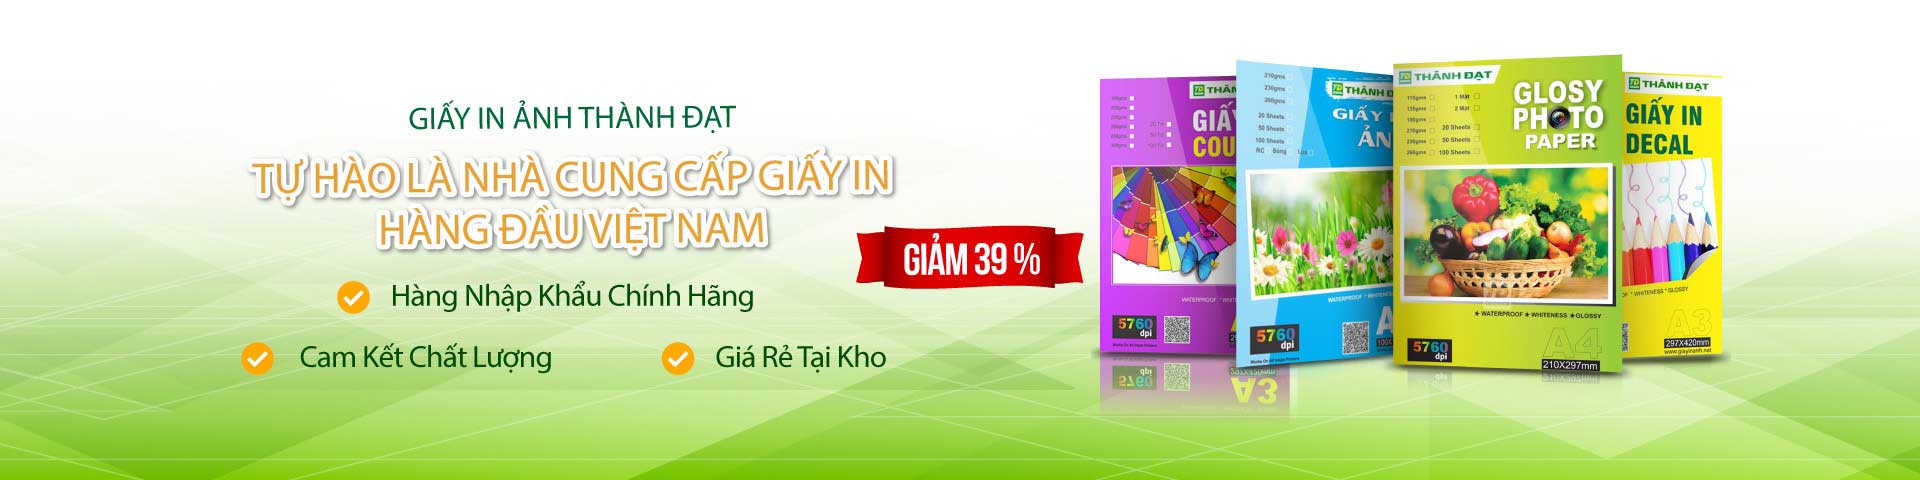 banner-giay-in-anh-td-1920x480.jpg.pagespeed.ce.5f2ypugmam